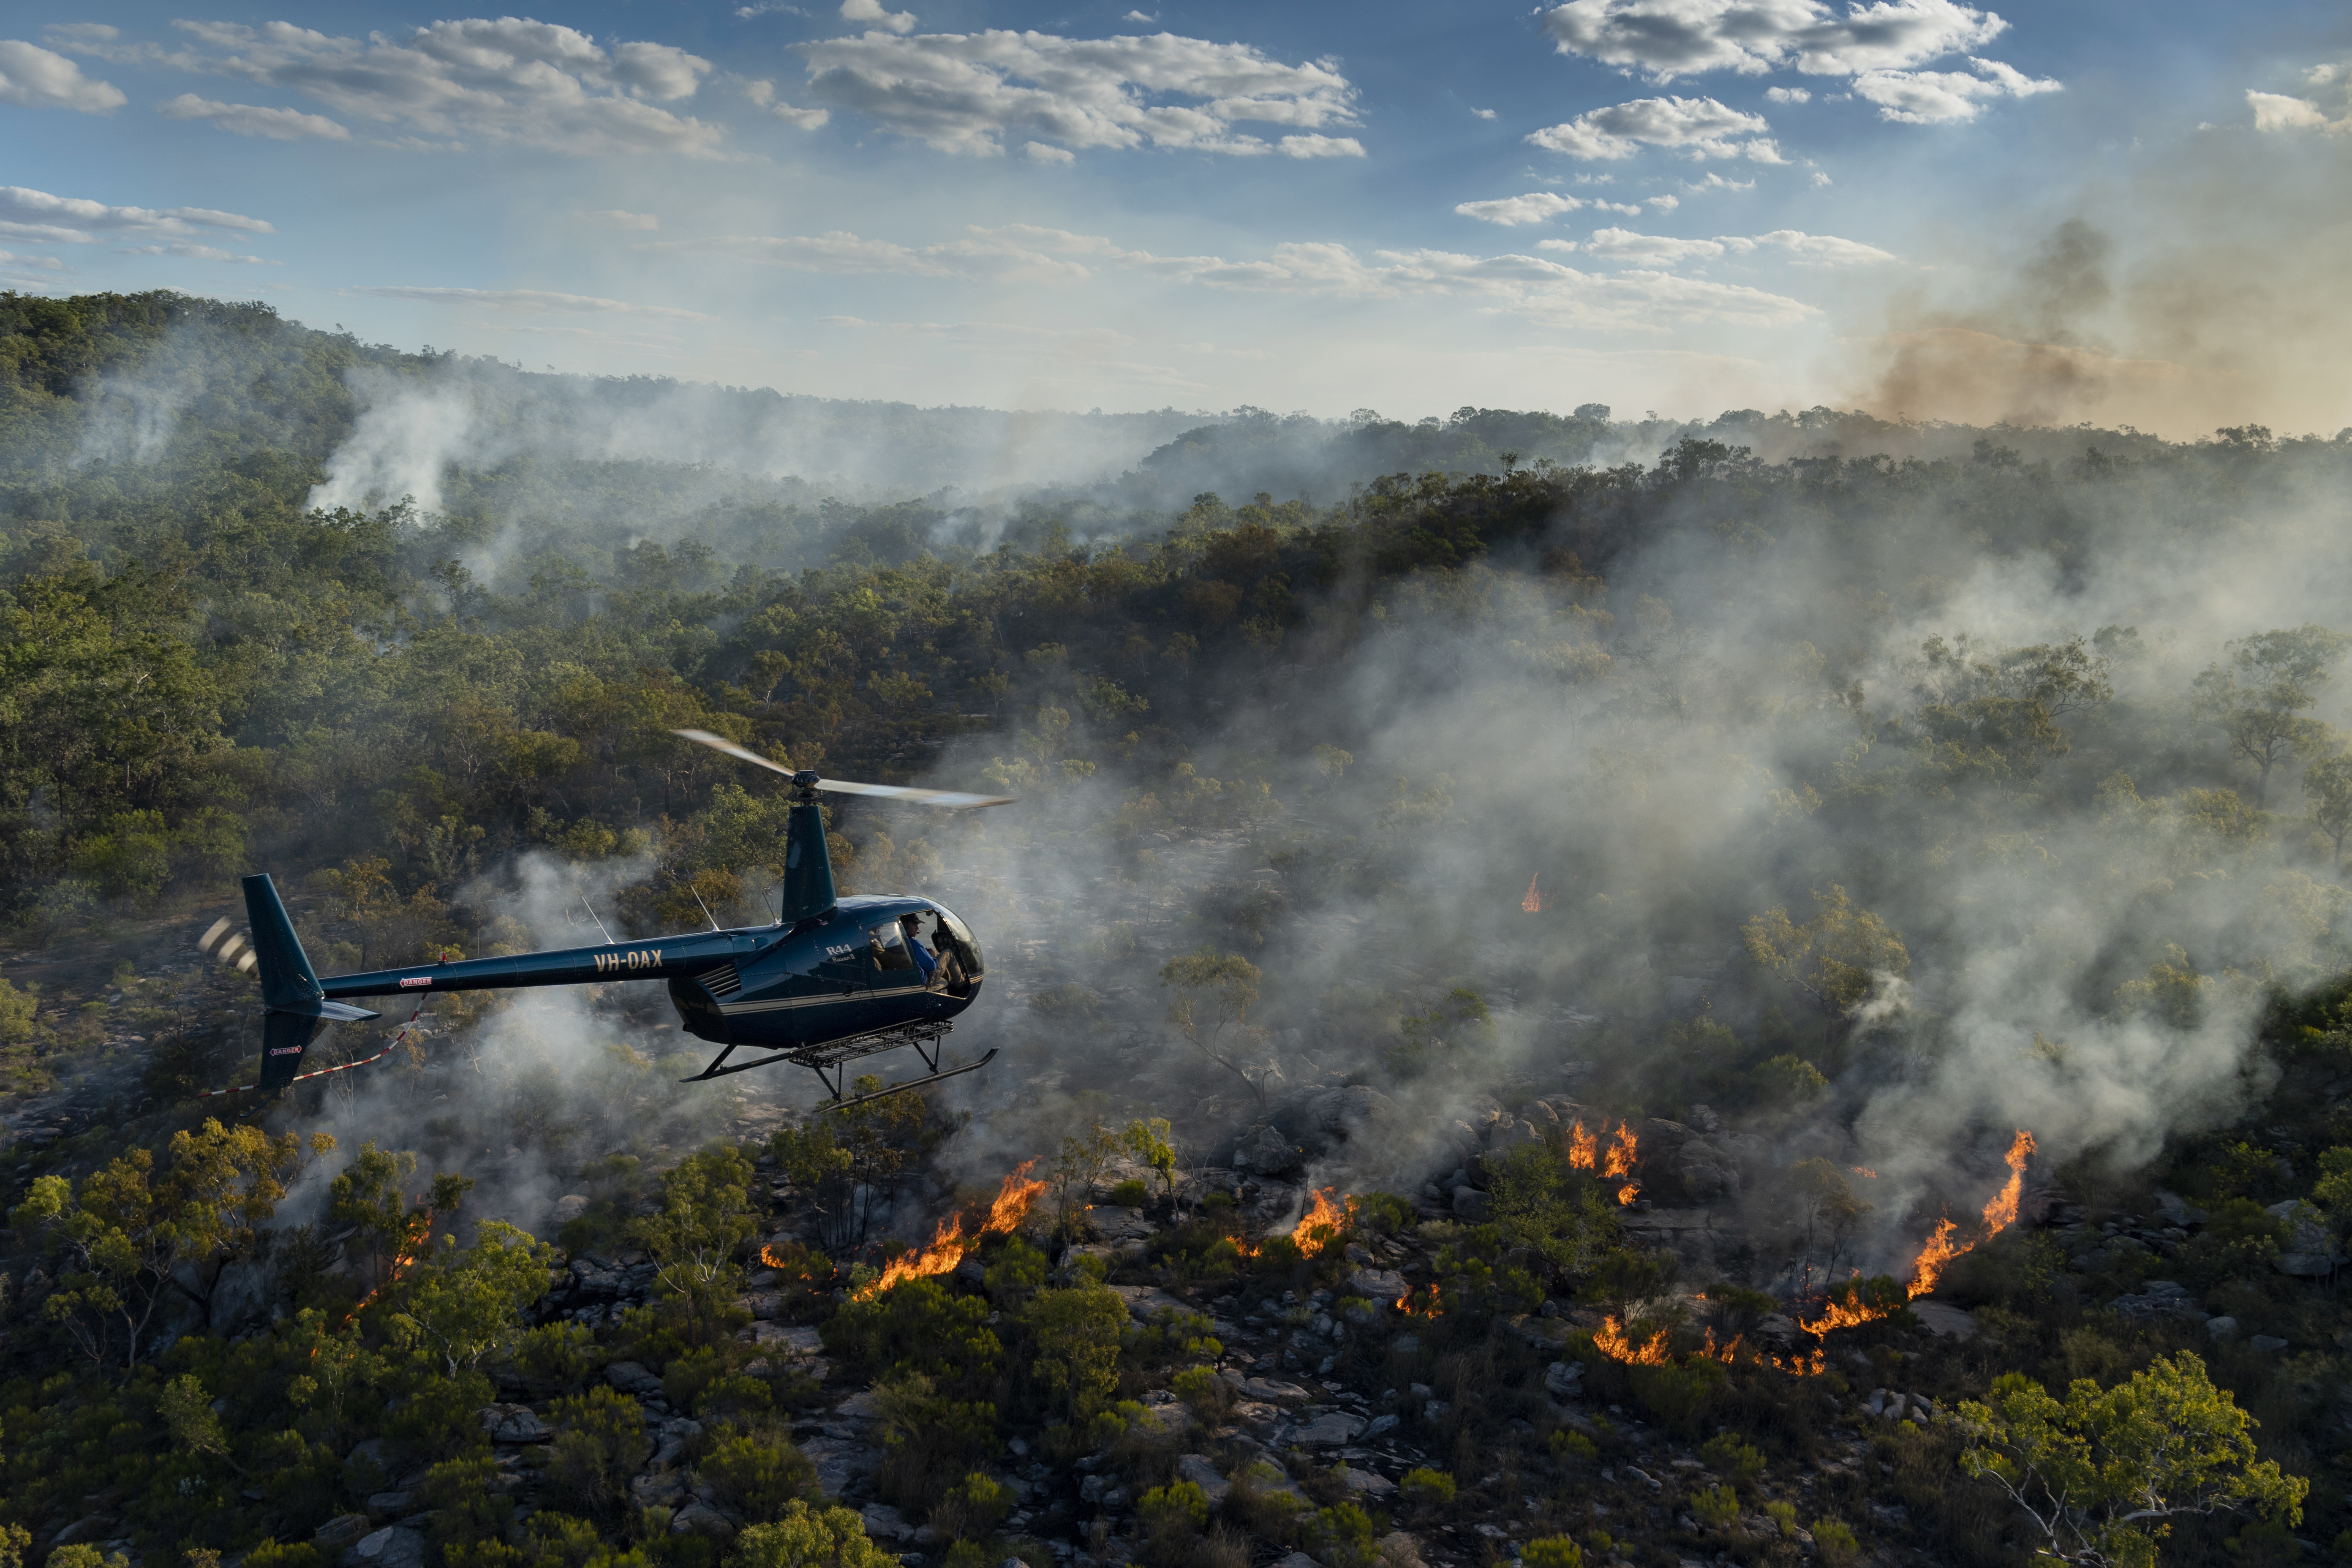 A helicopter drops fireballs the size of ping-pong balls to create small fires, in a controlled burning operation in Capari country, Arnhem Land, Australia.